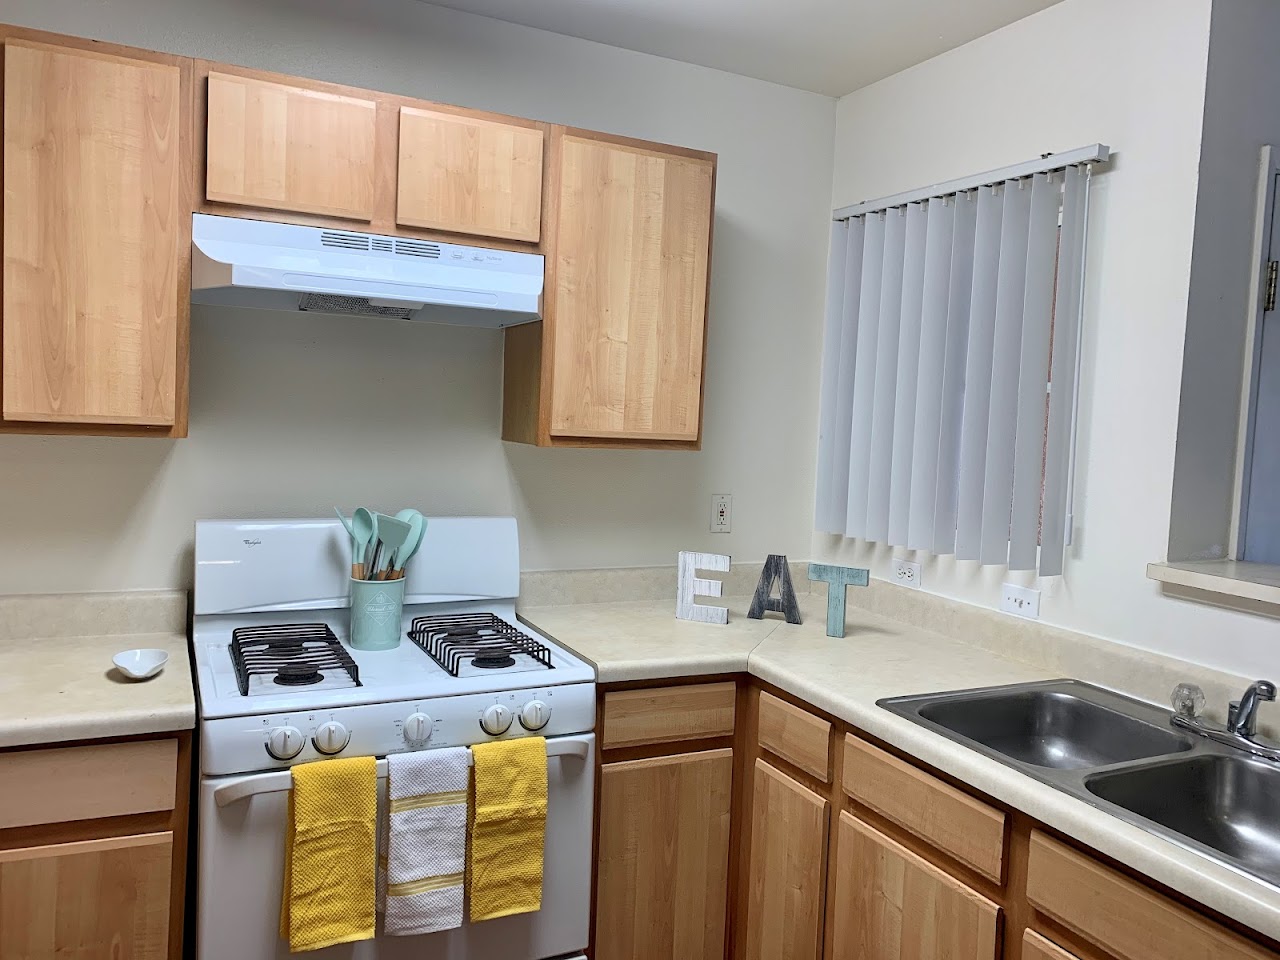 Photo of EL PALMAR APTS. Affordable housing located at 1112 E WHITNEY ST AVENAL, CA 93204